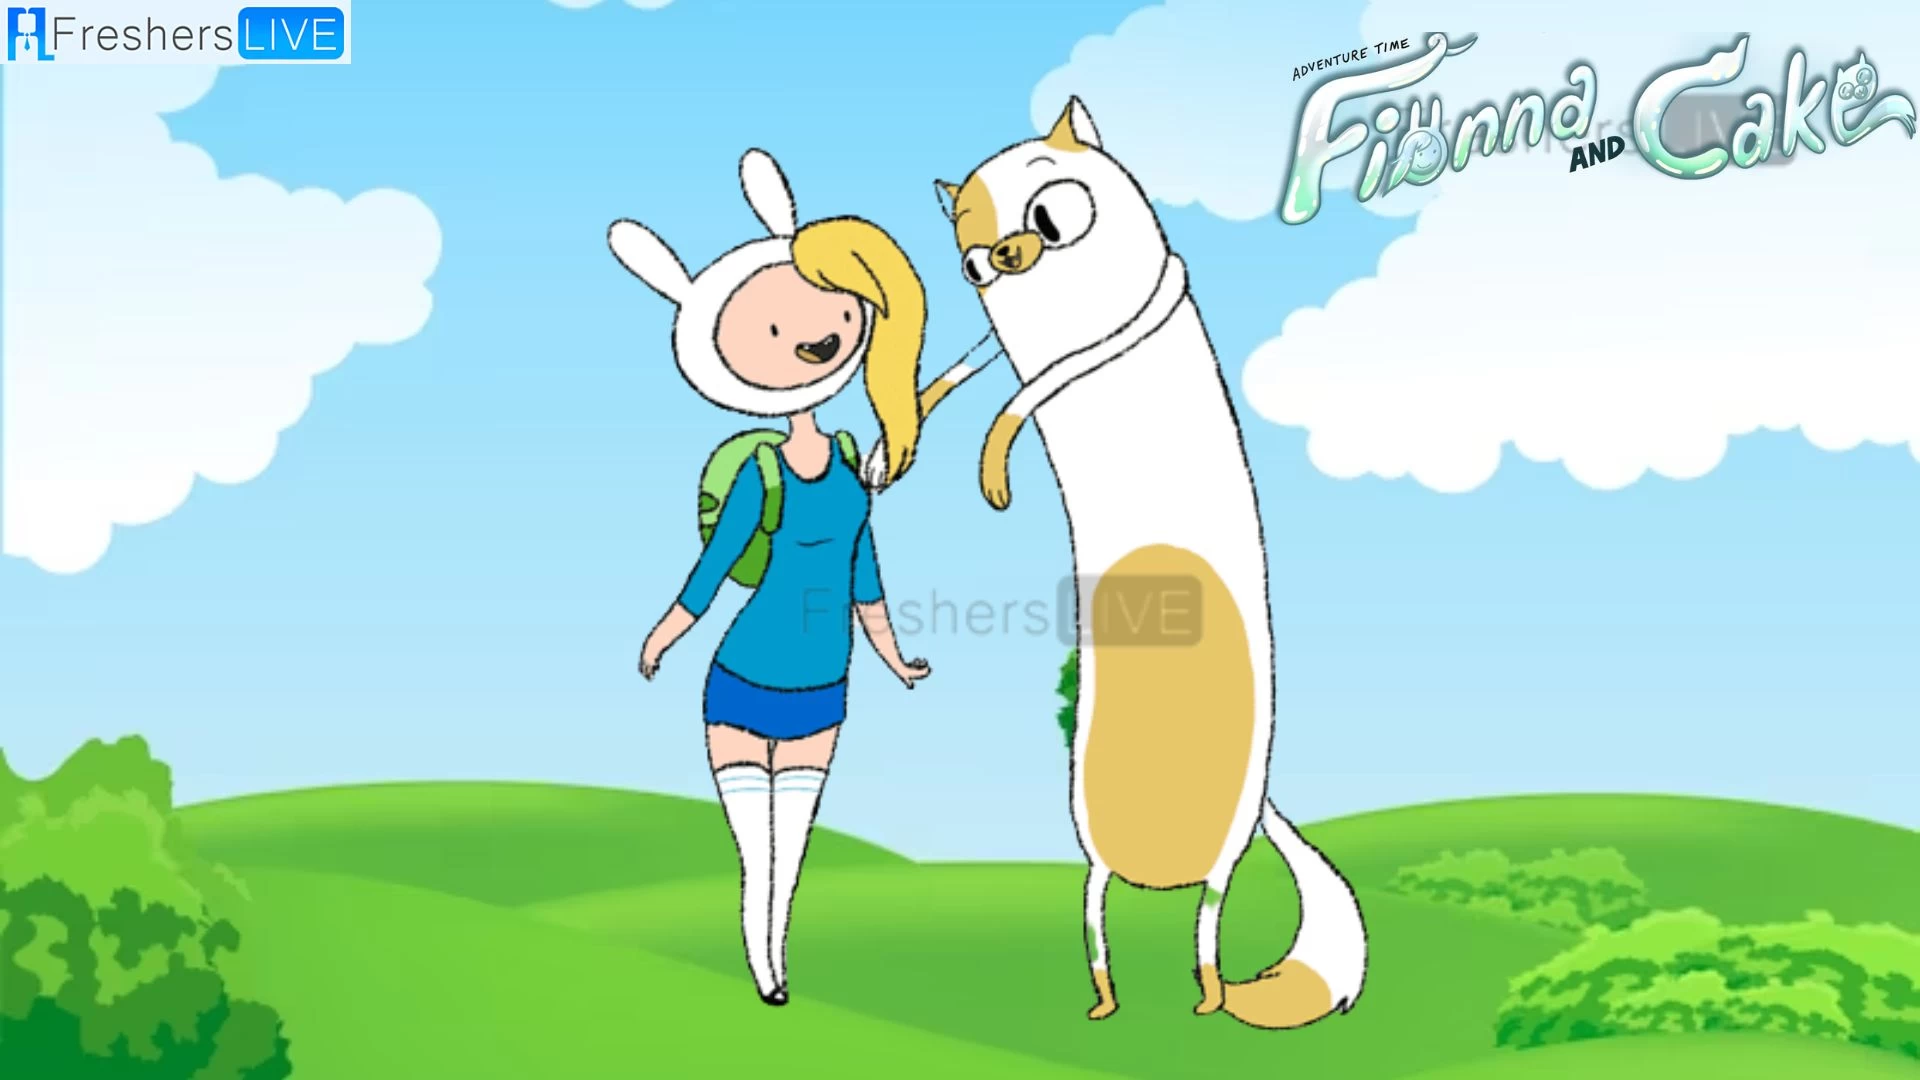 Adventure Time Fionna And Cake Season 1 Ending Explained, Release Date, Plot and More